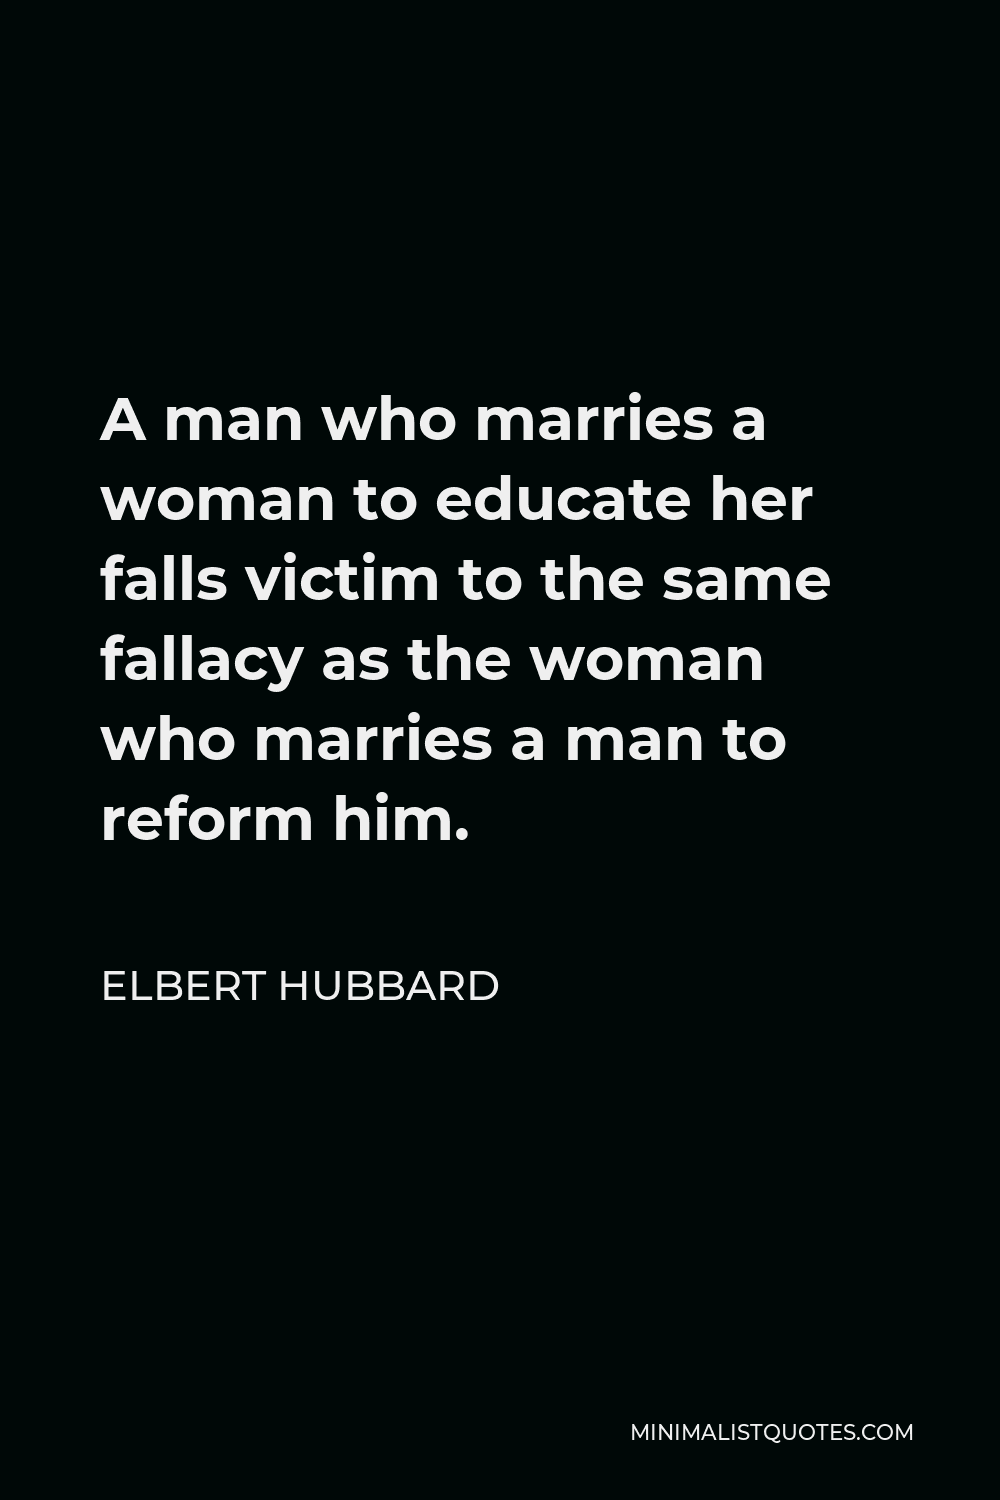 Elbert Hubbard Quote - A man who marries a woman to educate her falls victim to the same fallacy as the woman who marries a man to reform him.